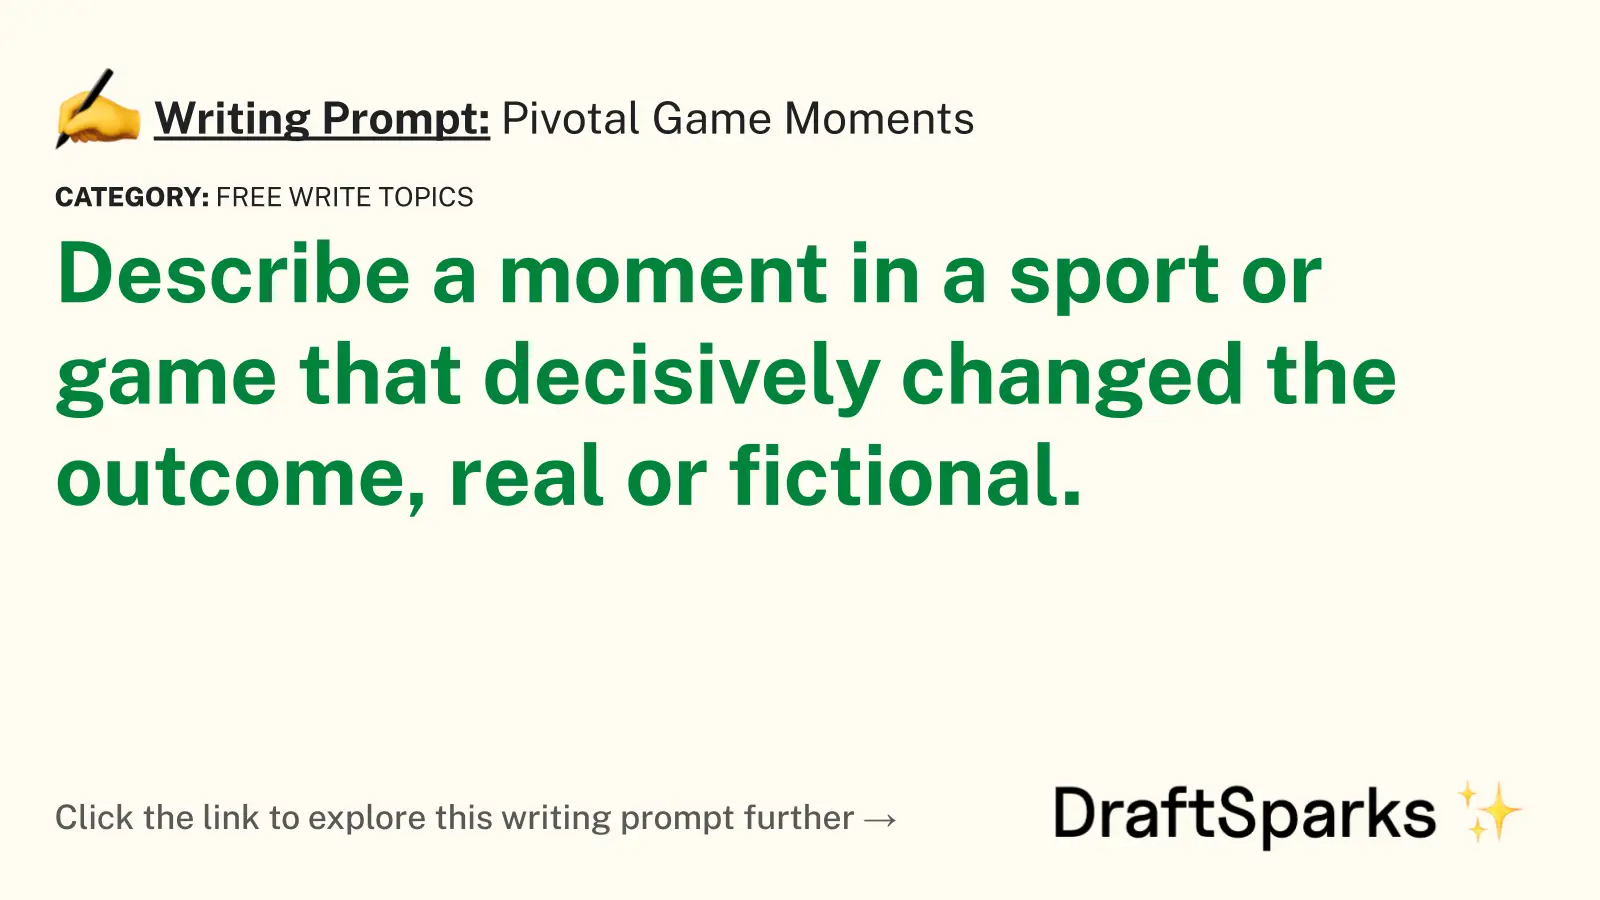 Pivotal Game Moments